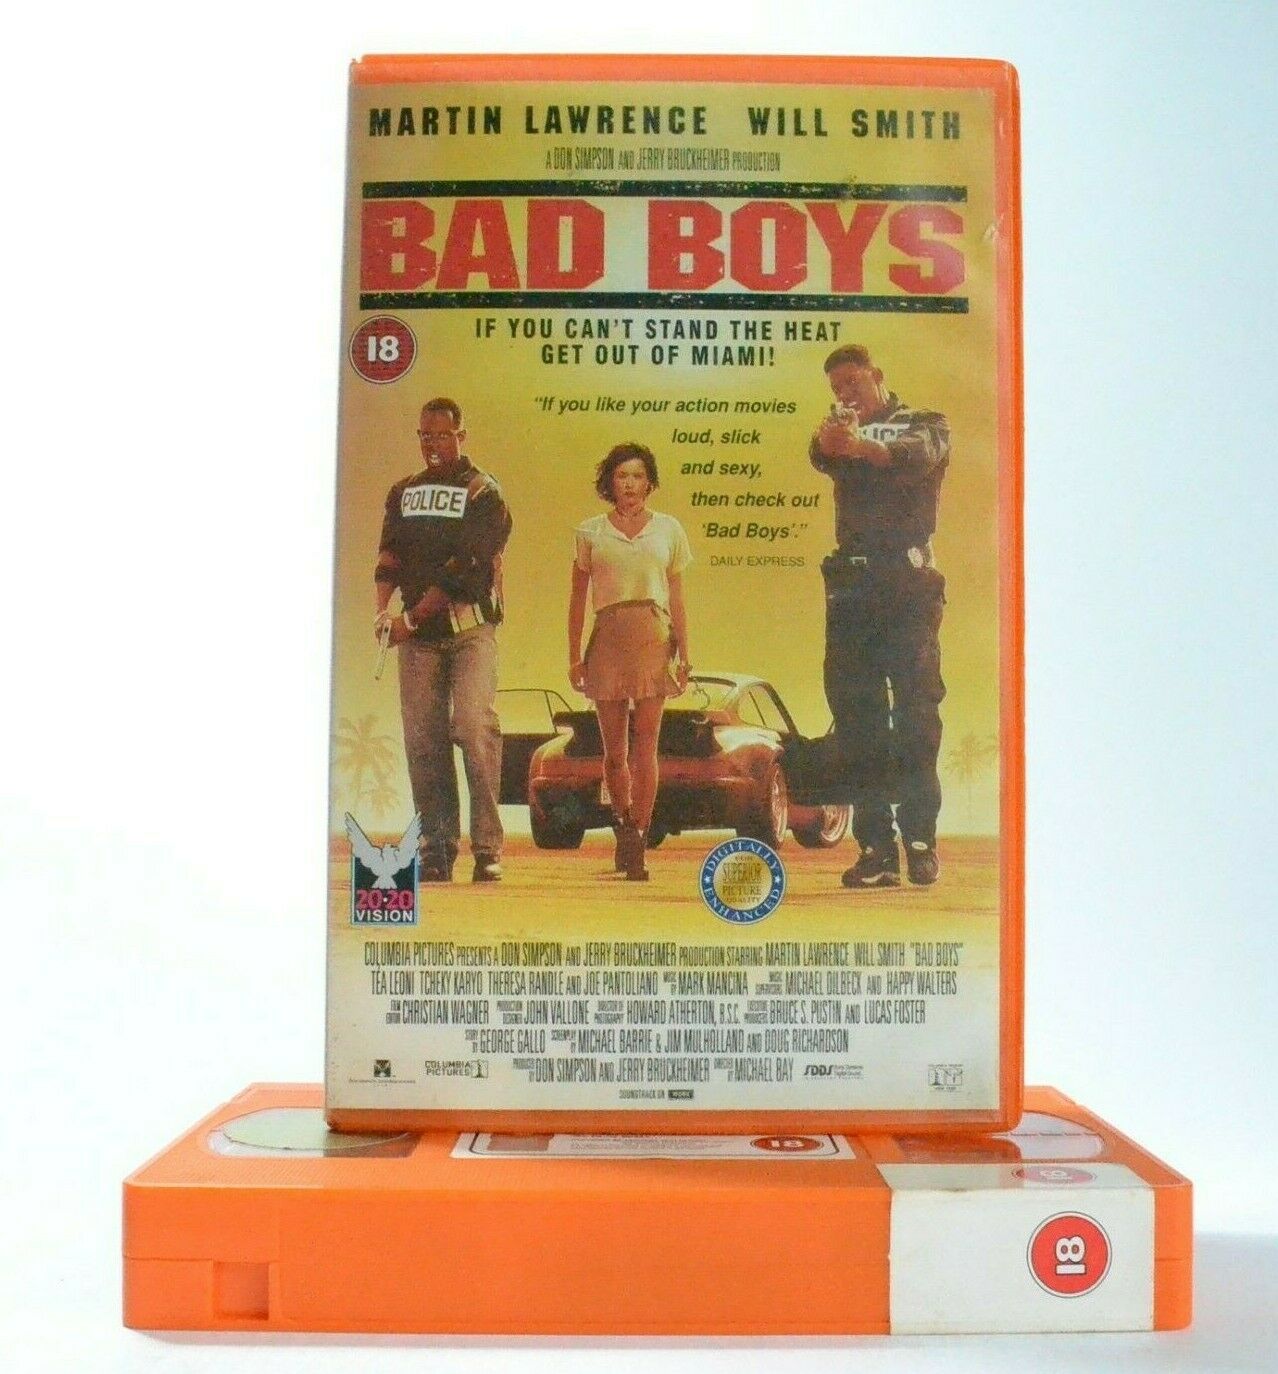 Bad Boys: 20/20 Vision (1995) - Action - Large Box - M.Lawrence/W.Smith - VHS-